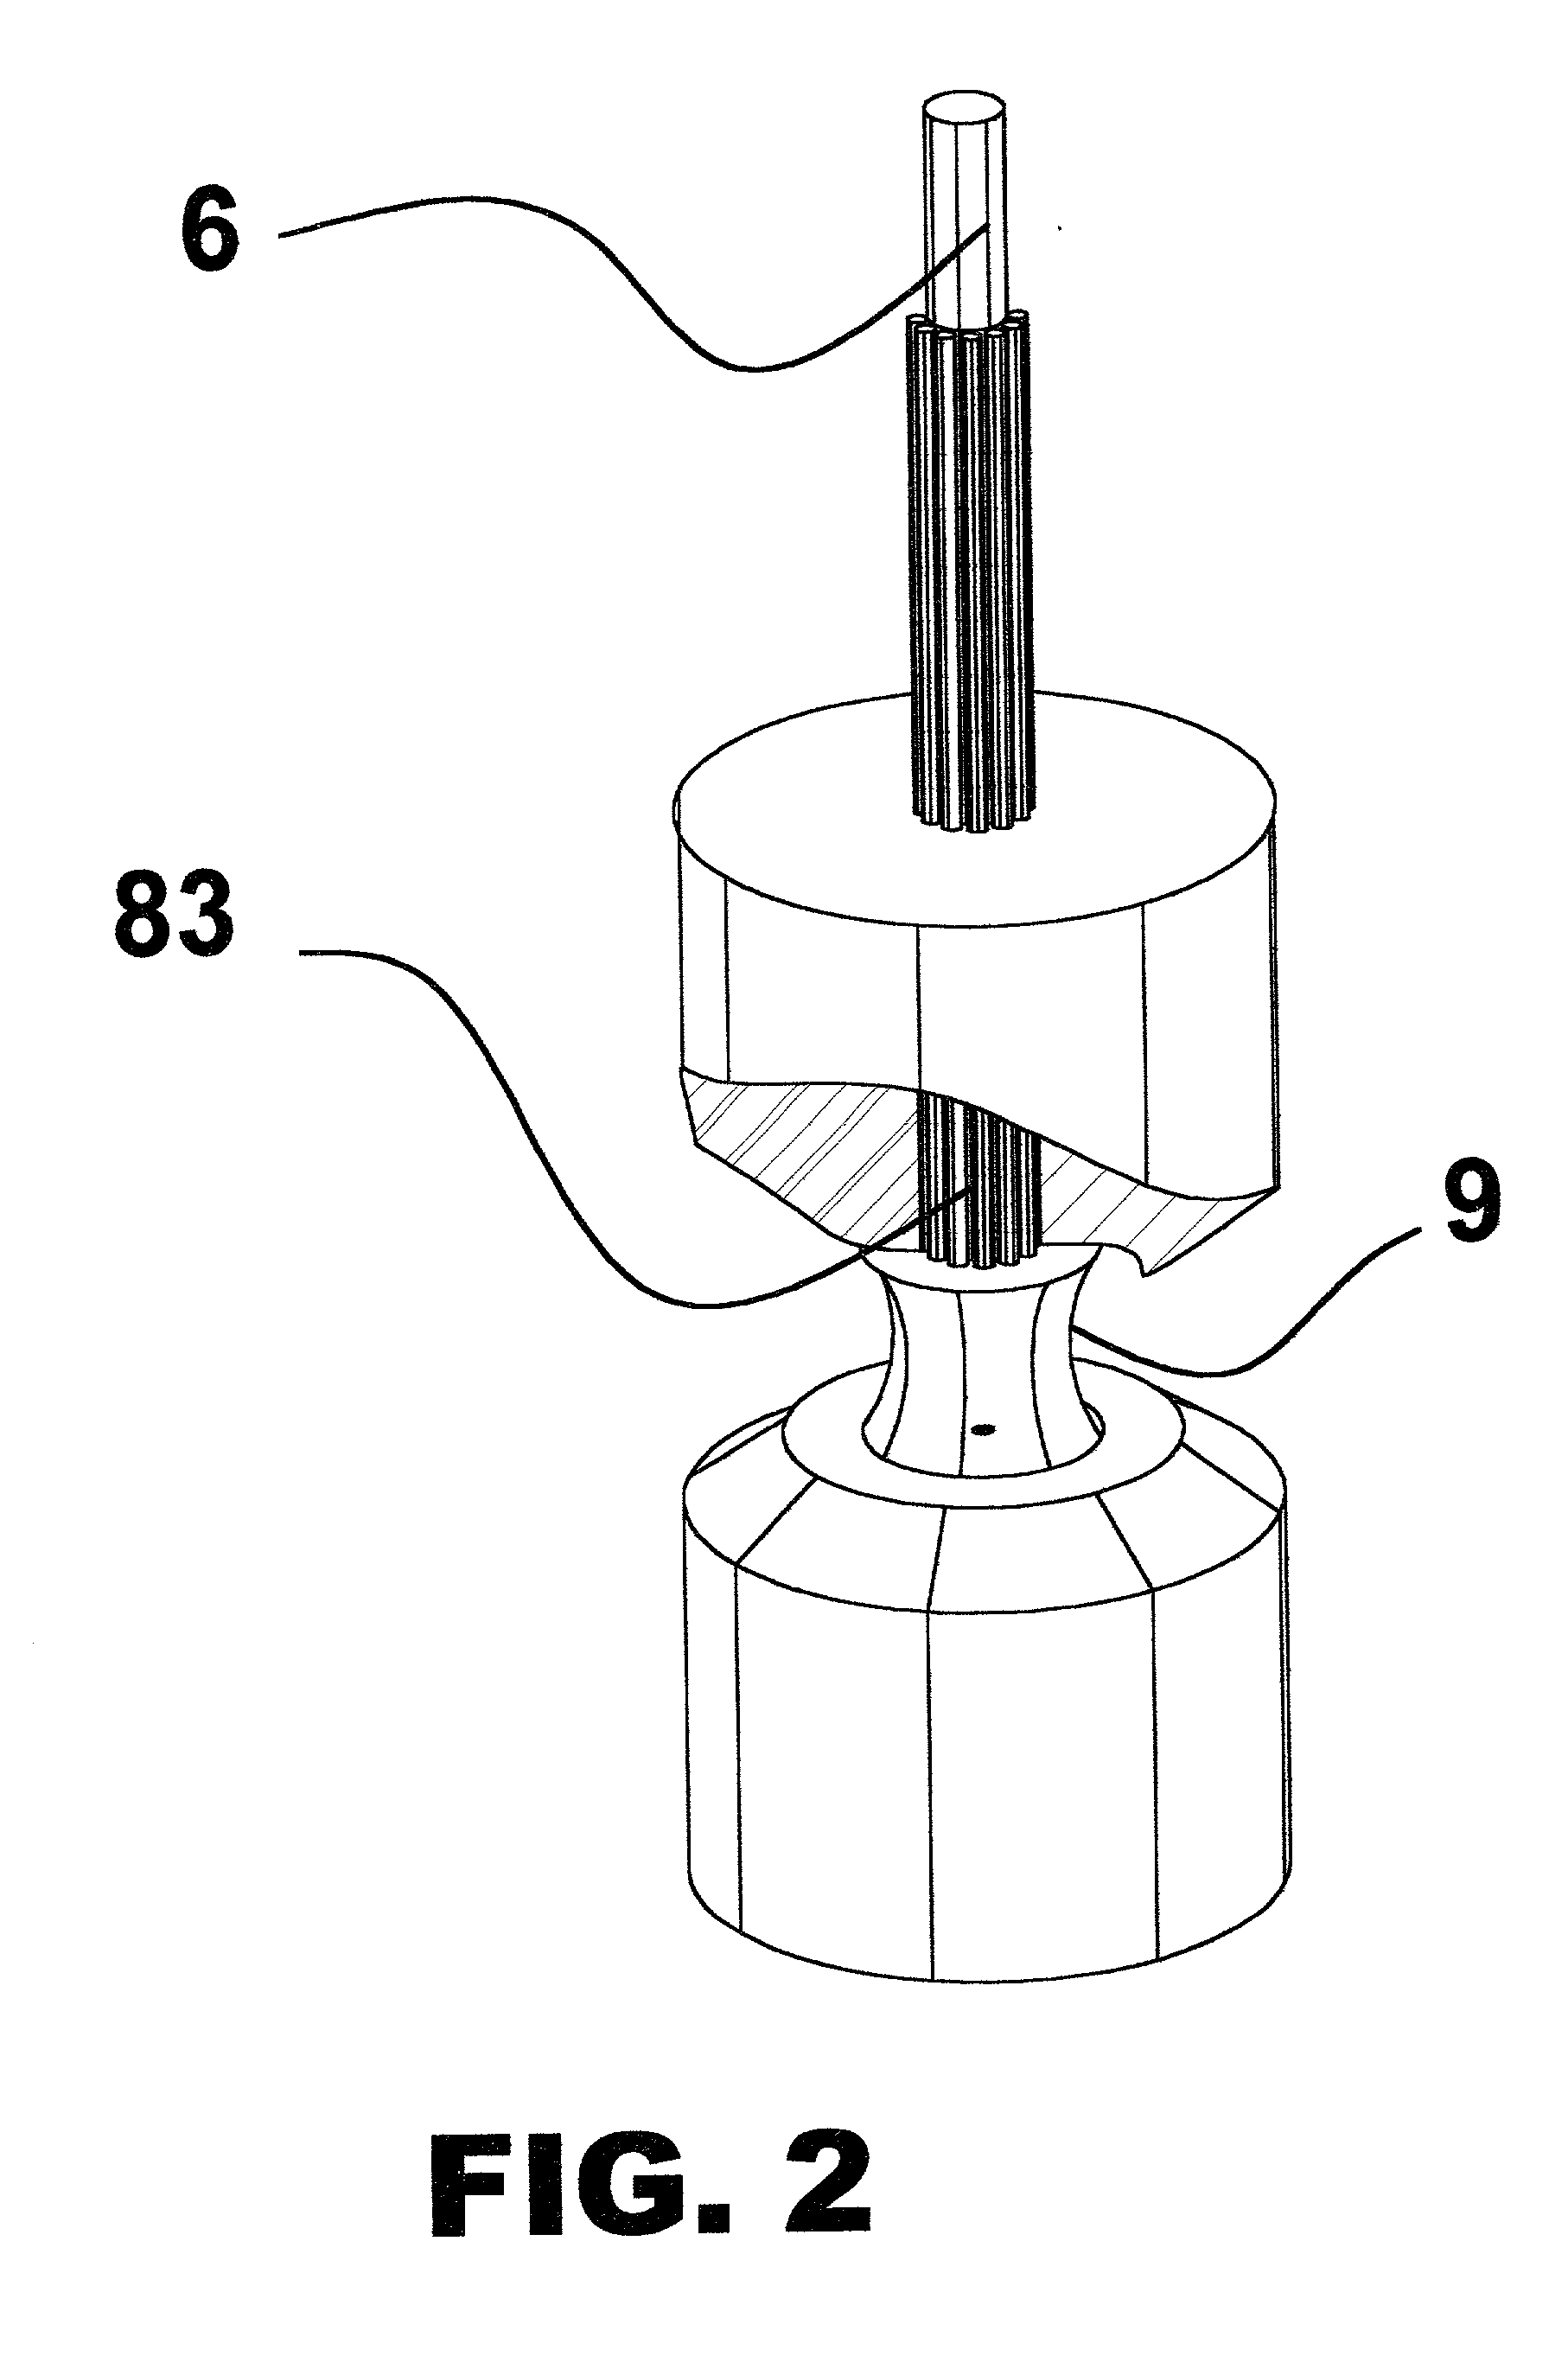 Liquid photometer using surface tension to contain sample